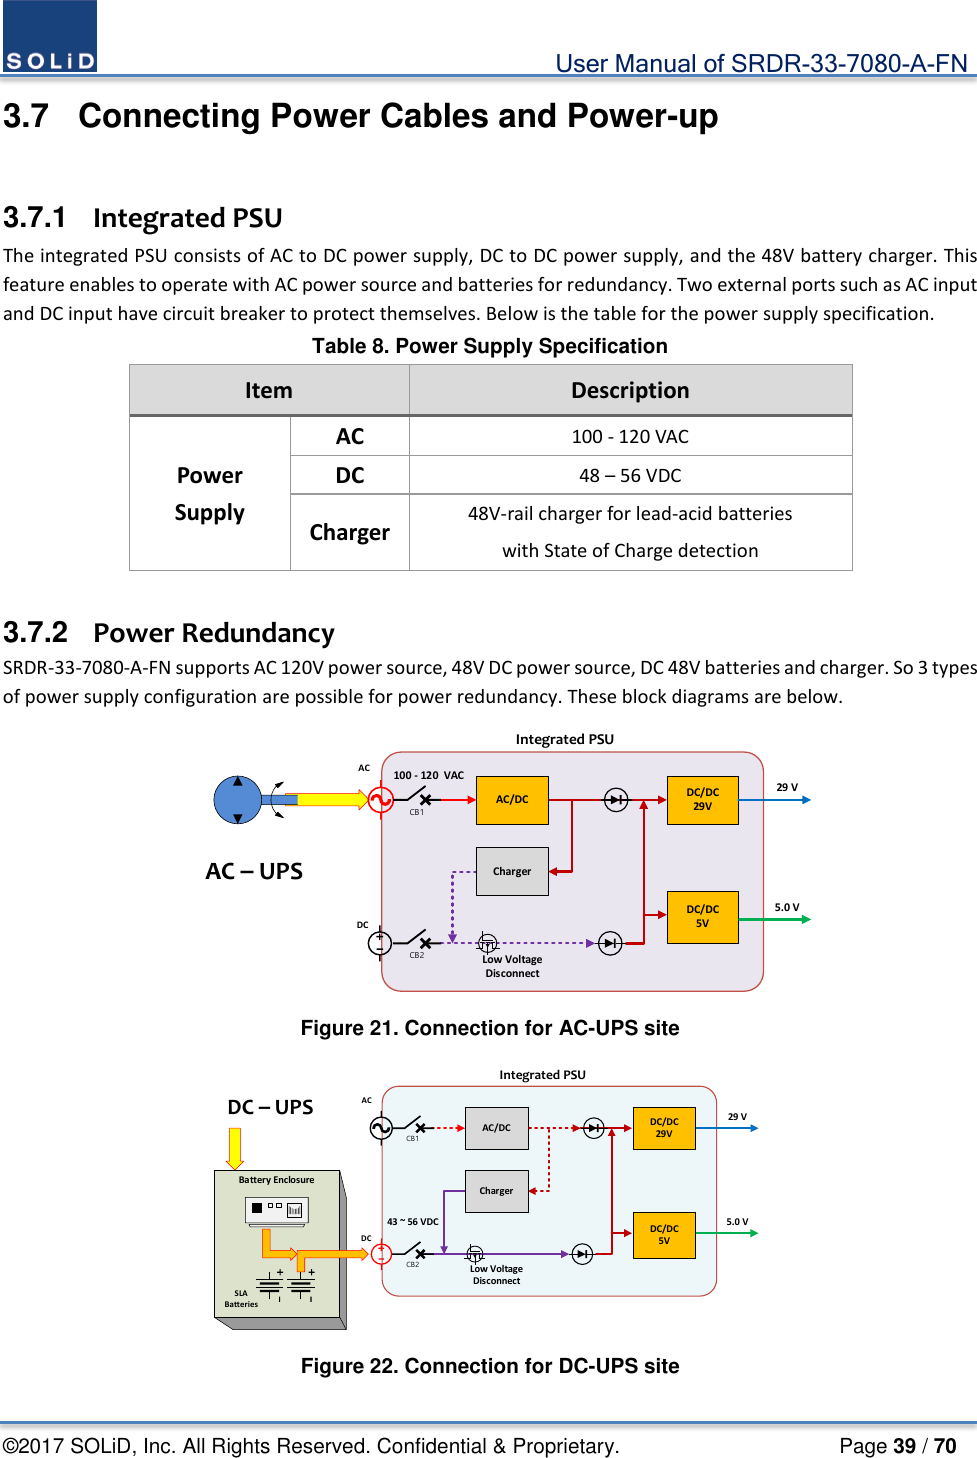                                             User Manual of SRDR-33-7080-A-FN ©2017 SOLiD, Inc. All Rights Reserved. Confidential &amp; Proprietary.                     Page 39 / 70 3.7  Connecting Power Cables and Power-up  3.7.1  Integrated PSU The integrated PSU consists of AC to DC power supply, DC to DC power supply, and the 48V battery charger. This feature enables to operate with AC power source and batteries for redundancy. Two external ports such as AC input and DC input have circuit breaker to protect themselves. Below is the table for the power supply specification. Table 8. Power Supply Specification Item Description Power Supply AC 100 - 120 VAC DC 48 – 56 VDC Charger 48V-rail charger for lead-acid batteries with State of Charge detection  3.7.2   Power Redundancy SRDR-33-7080-A-FN supports AC 120V power source, 48V DC power source, DC 48V batteries and charger. So 3 types of power supply configuration are possible for power redundancy. These block diagrams are below. 100 - 120  VACACDCAC/DCChargerDC/DC29VDC/DC5V29 V5.0 VAC – UPS Low Voltage DisconnectCB2CB1Integrated PSU Figure 21. Connection for AC-UPS site ACDC43 ~ 56 VDCAC/DCChargerDC – UPS DC/DC5V29 V5.0 VBattery EnclosureLow Voltage DisconnectDC/DC29VCB1CB2SLA BatteriesIntegrated PSU Figure 22. Connection for DC-UPS site 